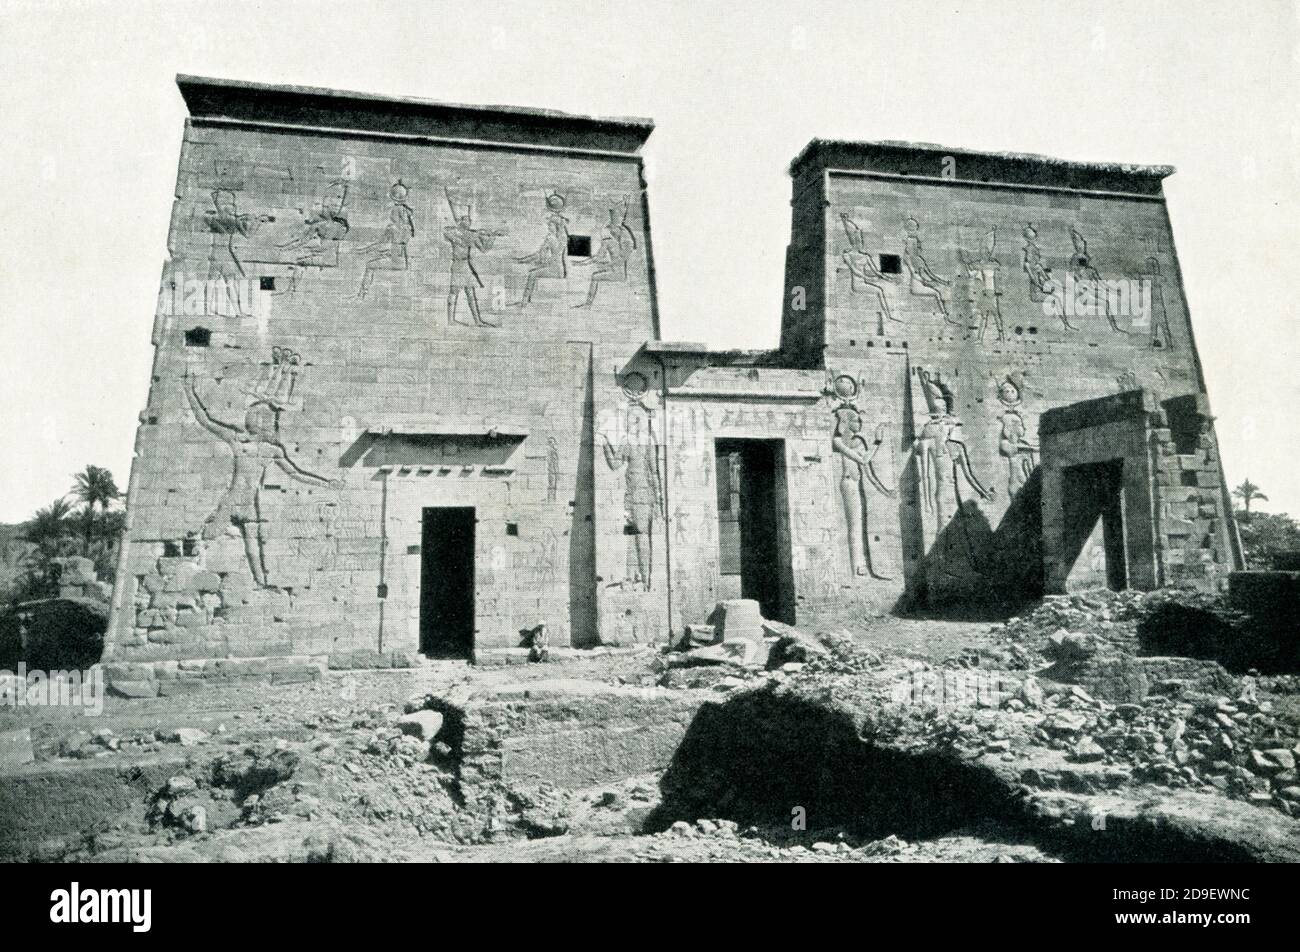 This photo shows the south front of temple of Isis at Philae - before the building of the Aswan Dam. Construction on the temple began around 280 B.C. Built during the reign of Ptolemy II (Egypt’s Greco-Roman Period), the Temple of Isis at Philae is dedicated to Isis, Osiris, and Horus. The temple walls contain Stock Photo